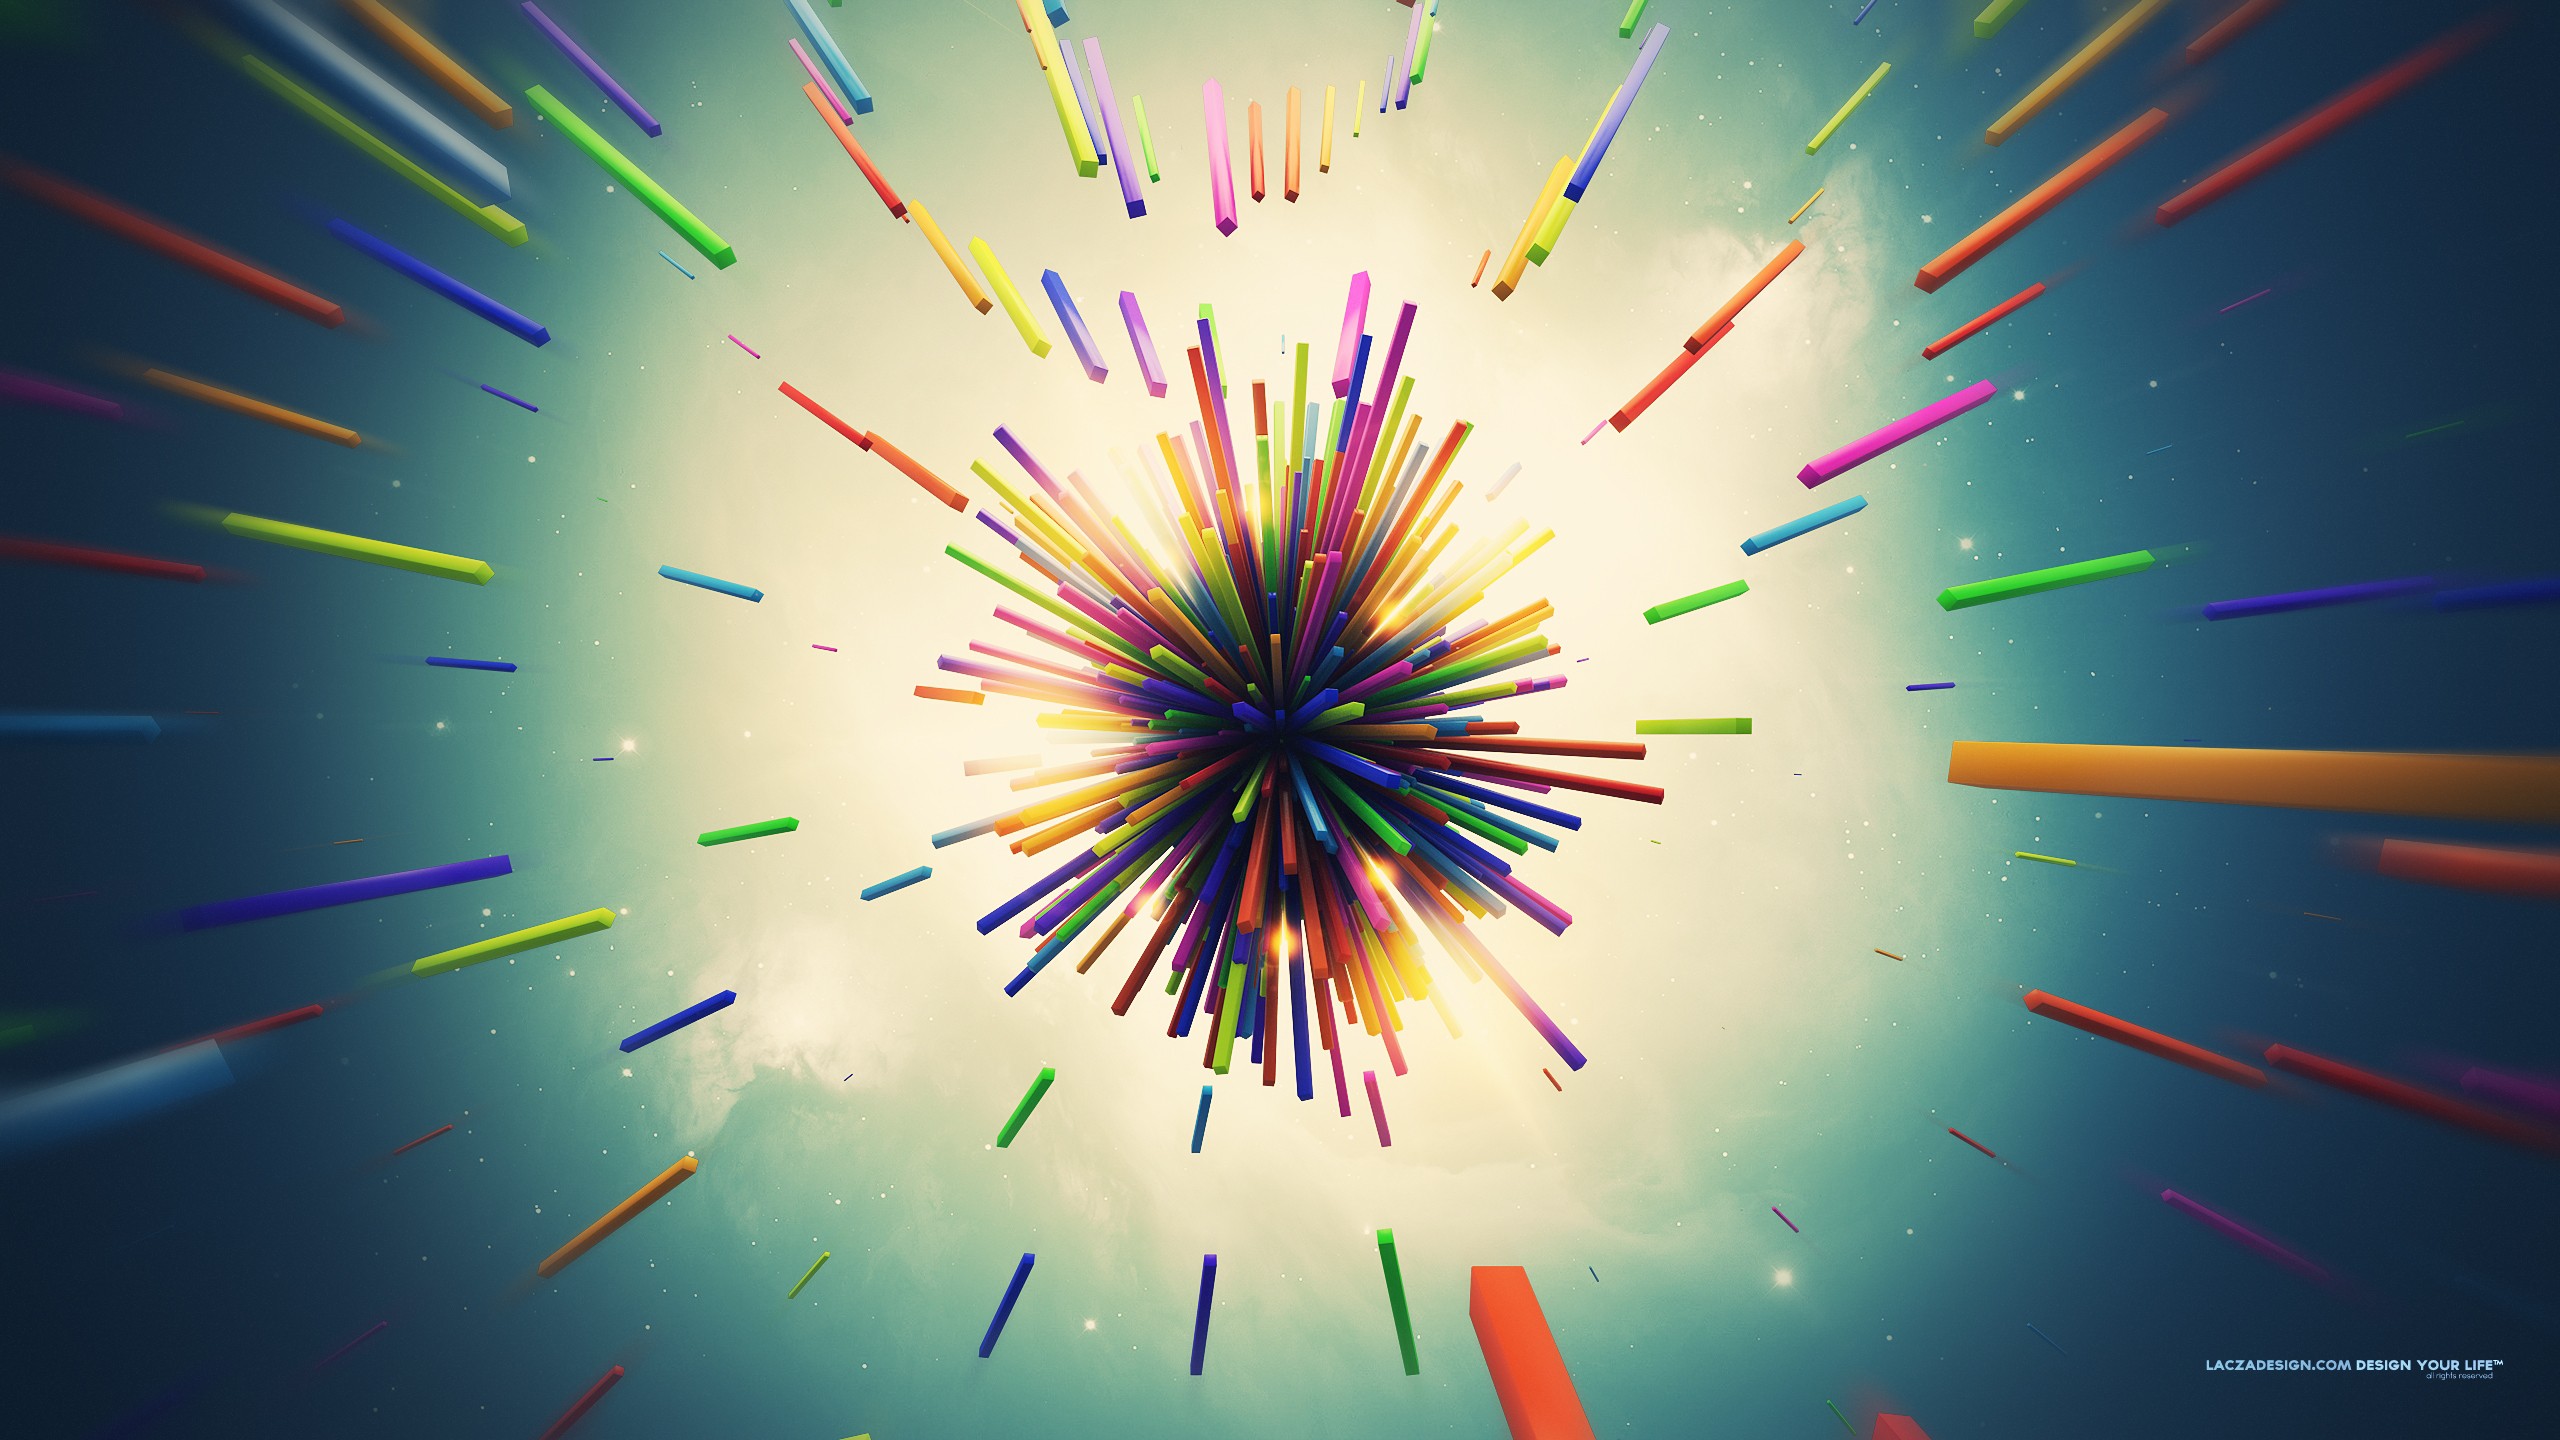 Lacza Abstract 3D Colorful Shapes Explosion Digital Art 2560x1440